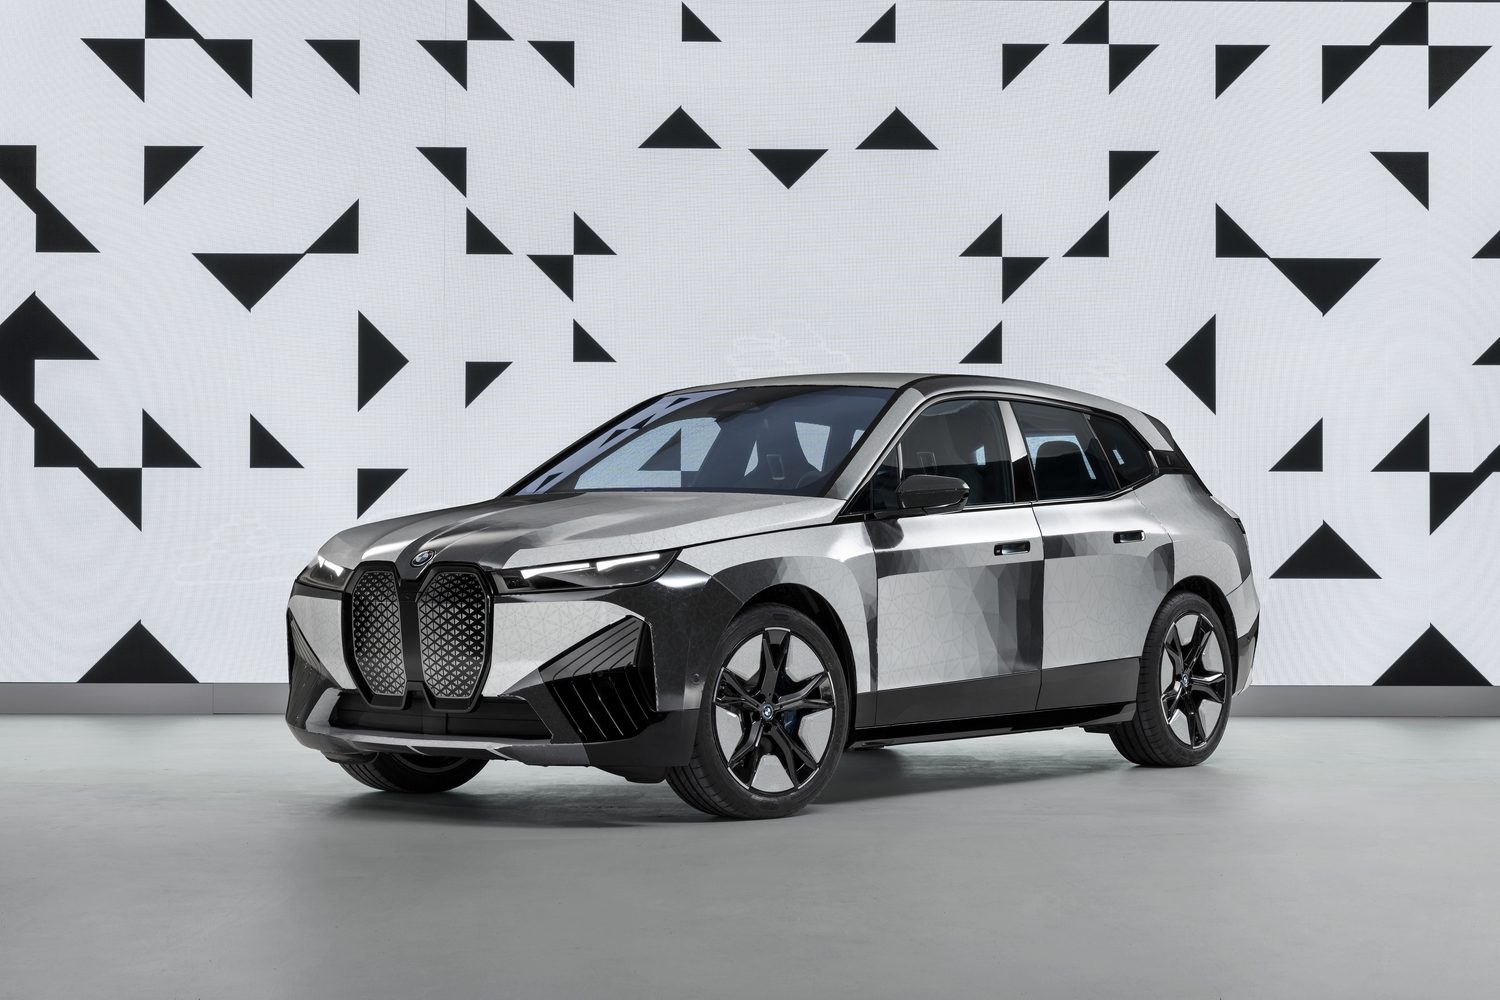 Car News | BMW brings art and relaxation to the car